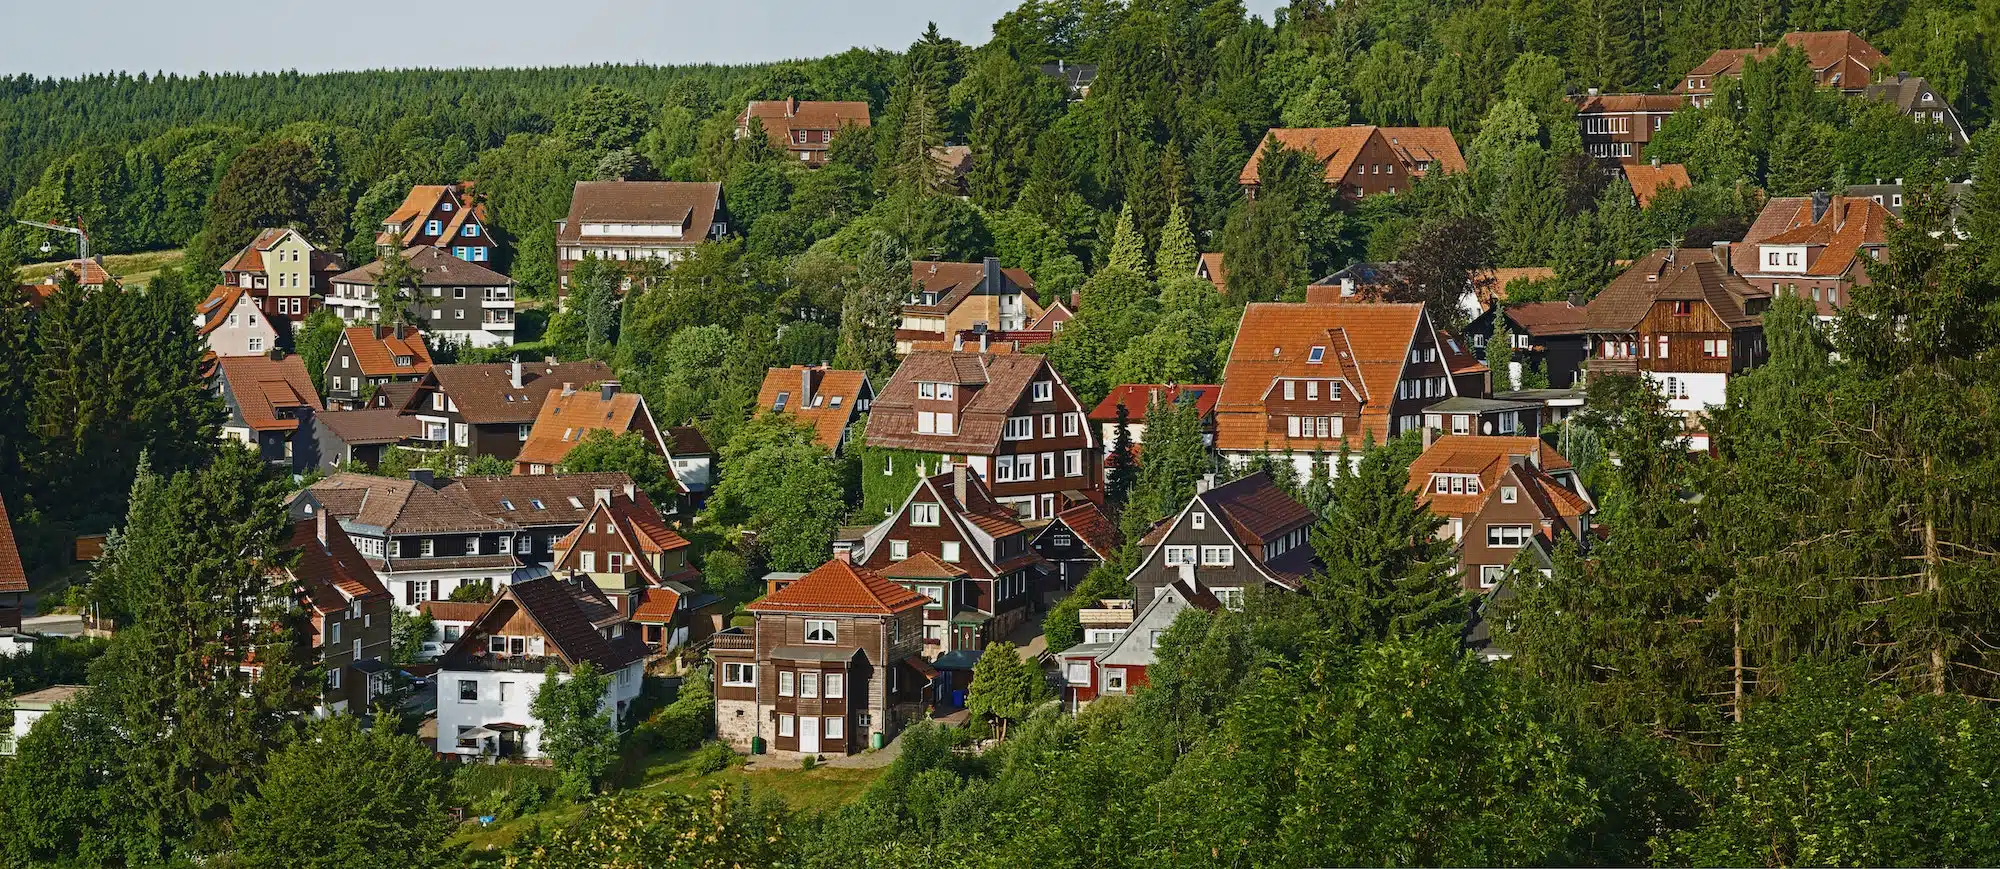 Qauint village in Hartz, Germany. A high angle view of a quaint village - Hartz, Germany.